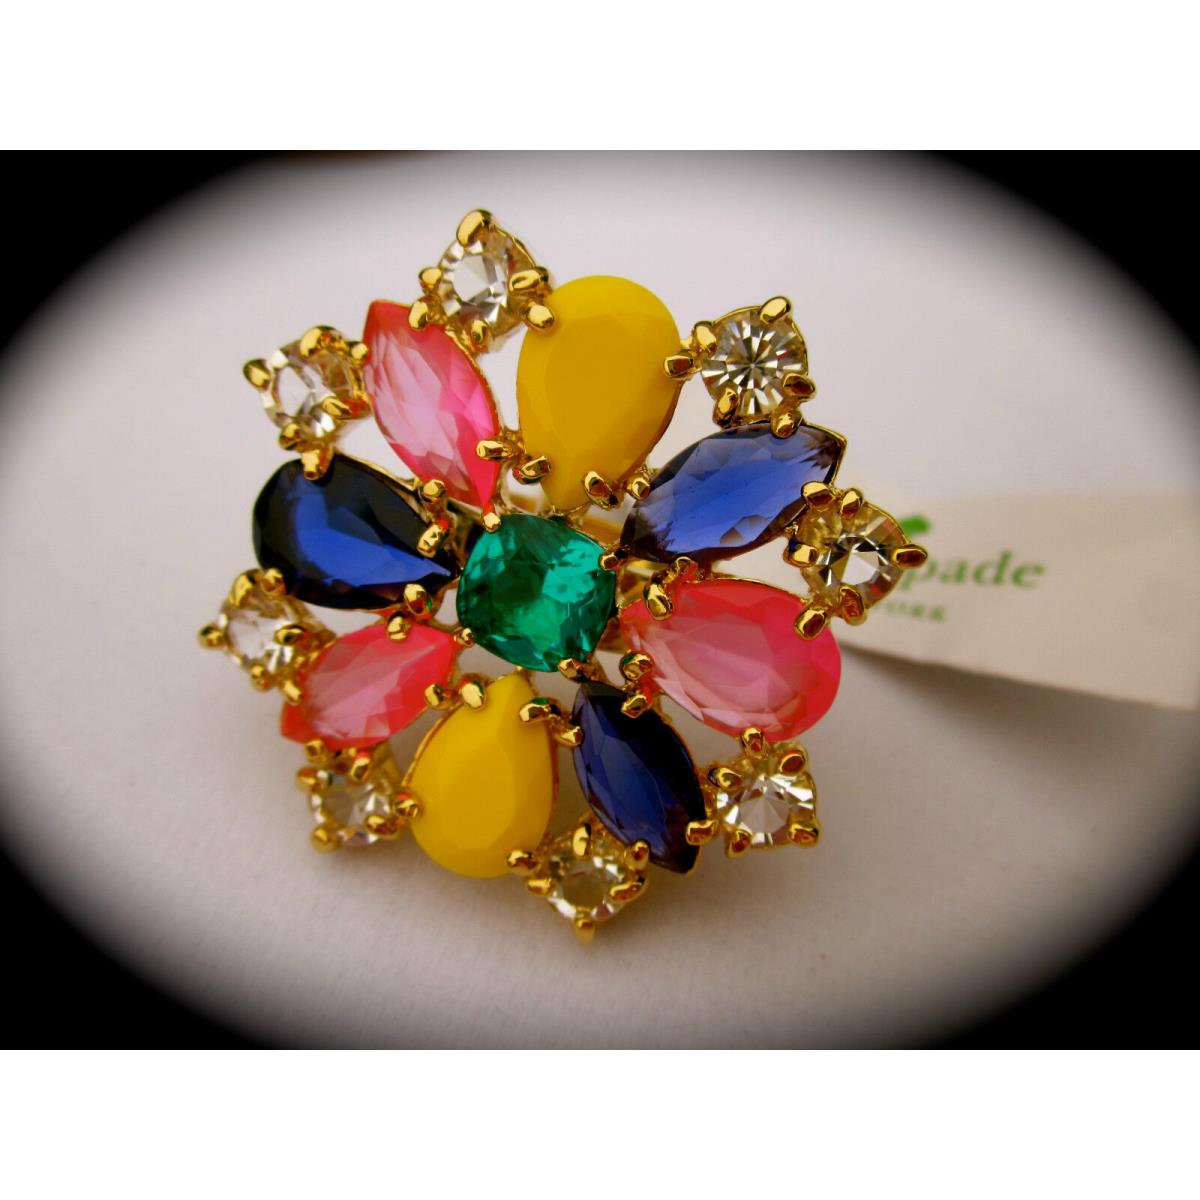 Kate Spade York Rare Kaleidoscope Floral Flower Jeweled Ring 8 Exquisite